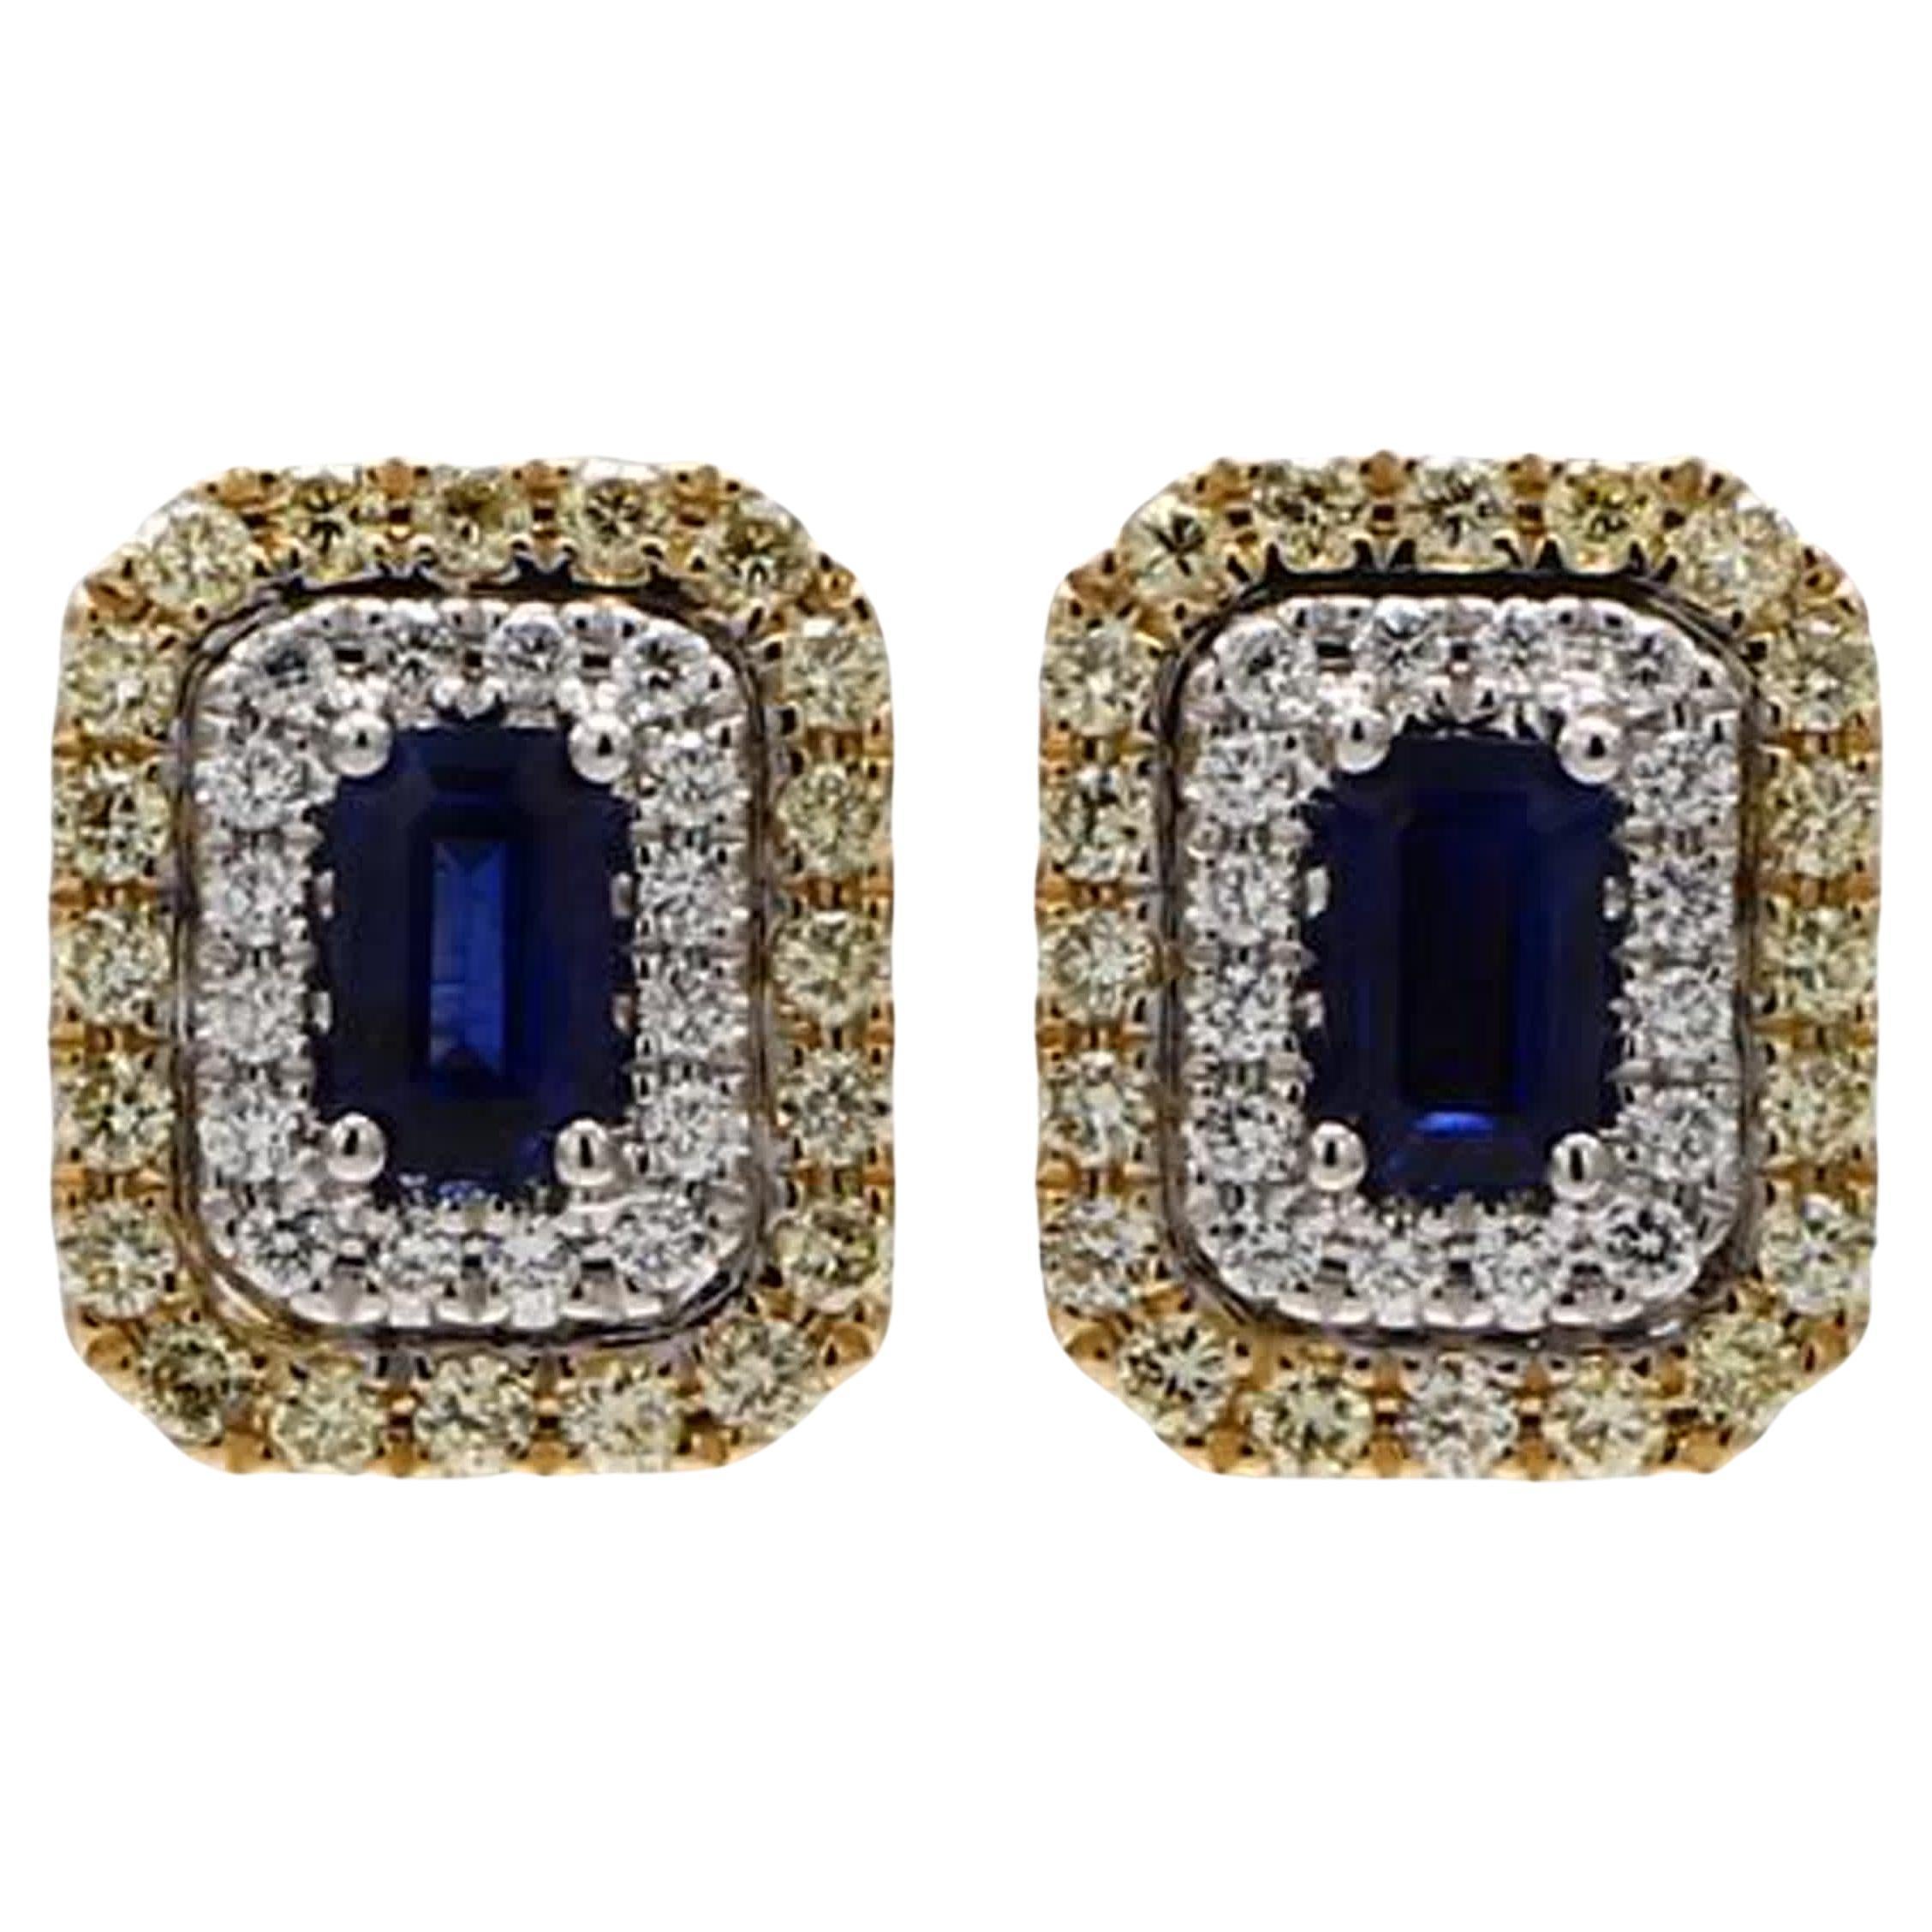 Natural Blue Emerald Cut Sapphire and Yellow Diamond 1.43 Carat TW Gold Earrings For Sale